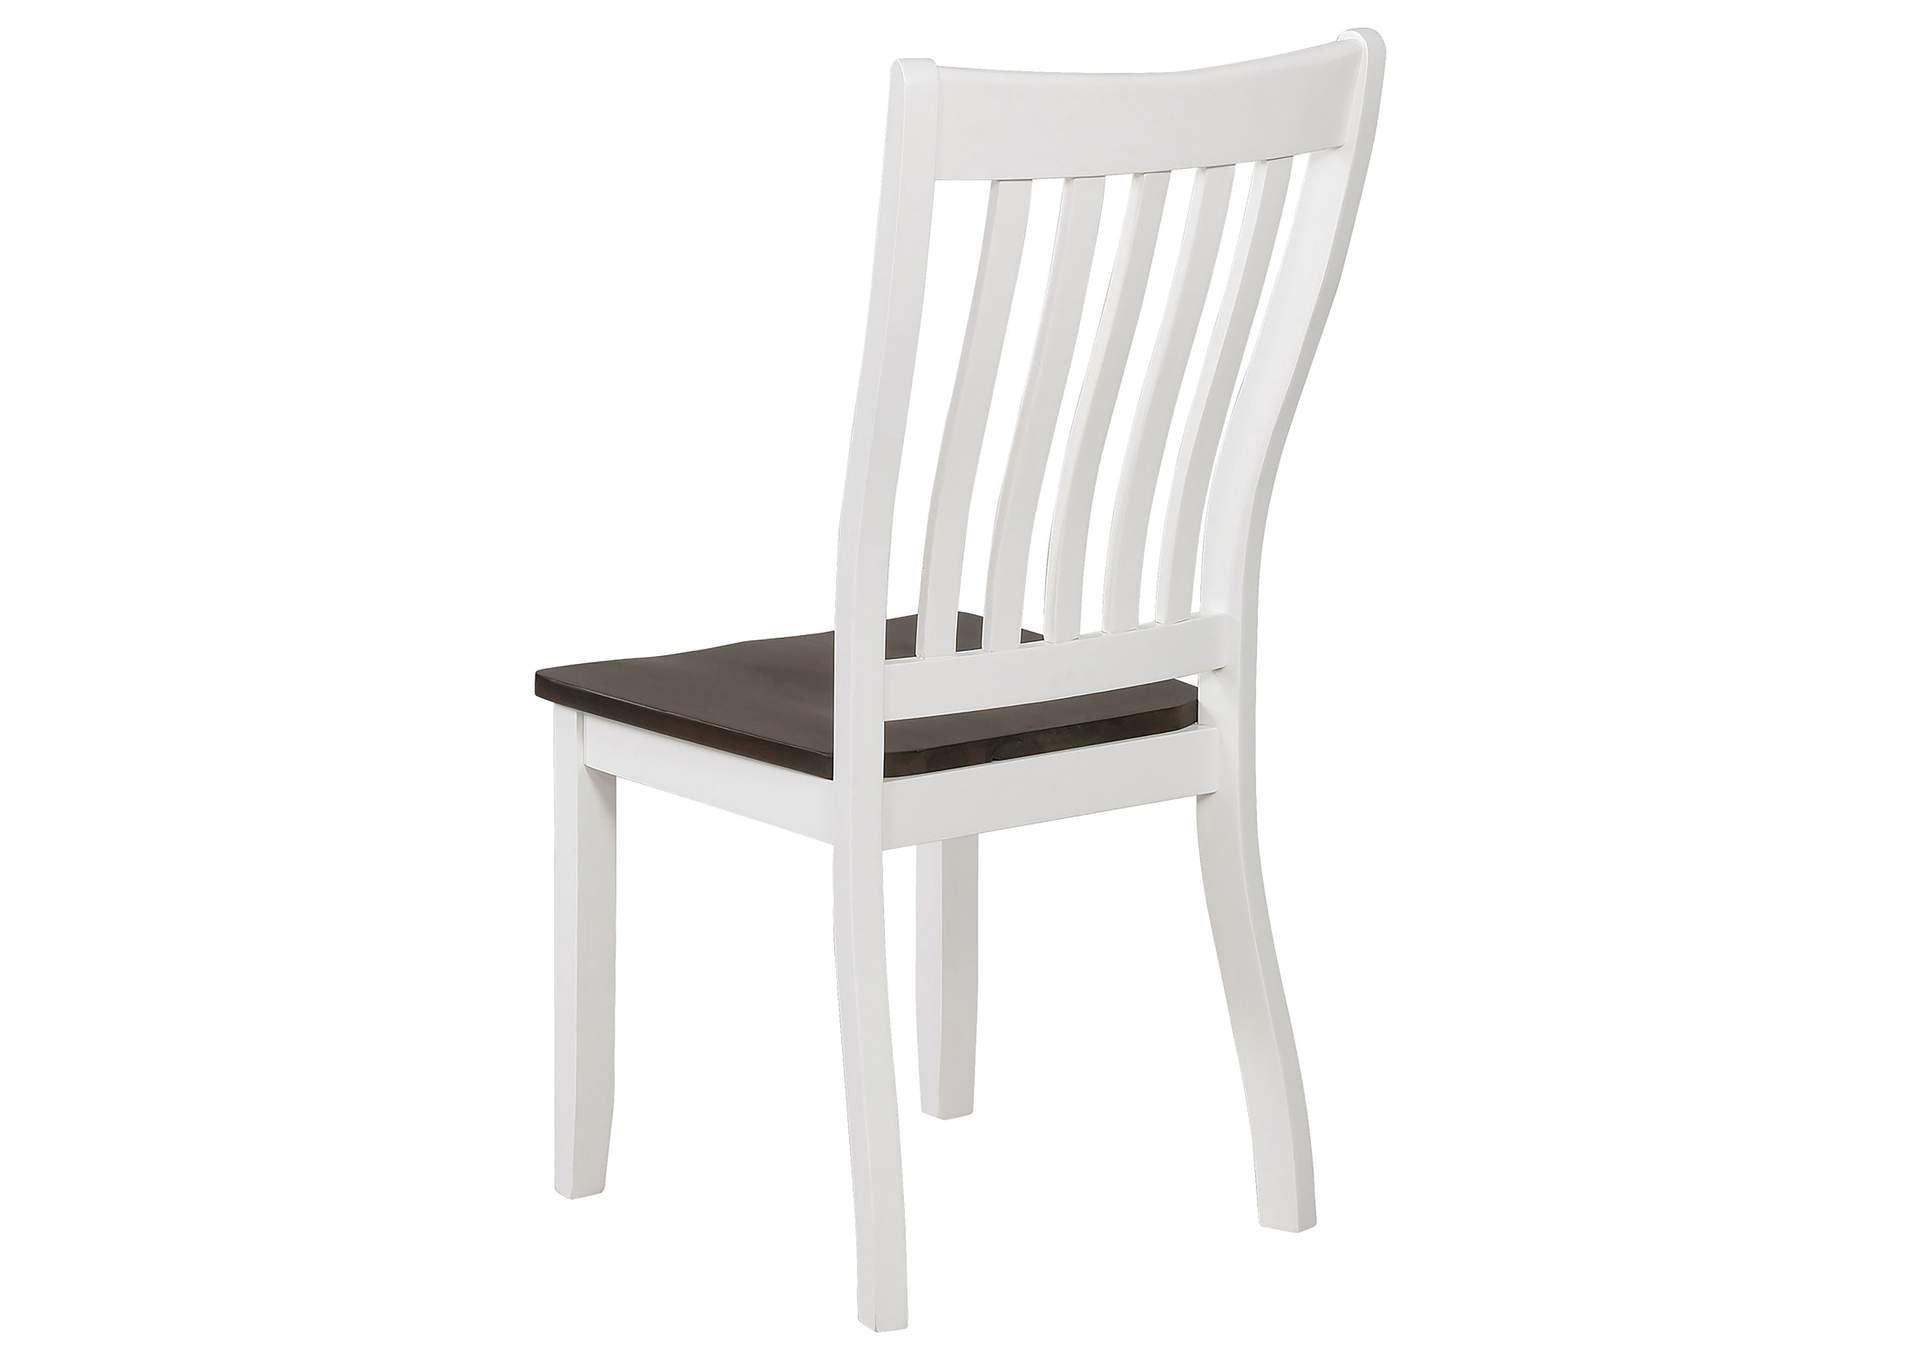 Kingman Slat Back Dining Chairs Espresso and White (Set of 2),Coaster Furniture